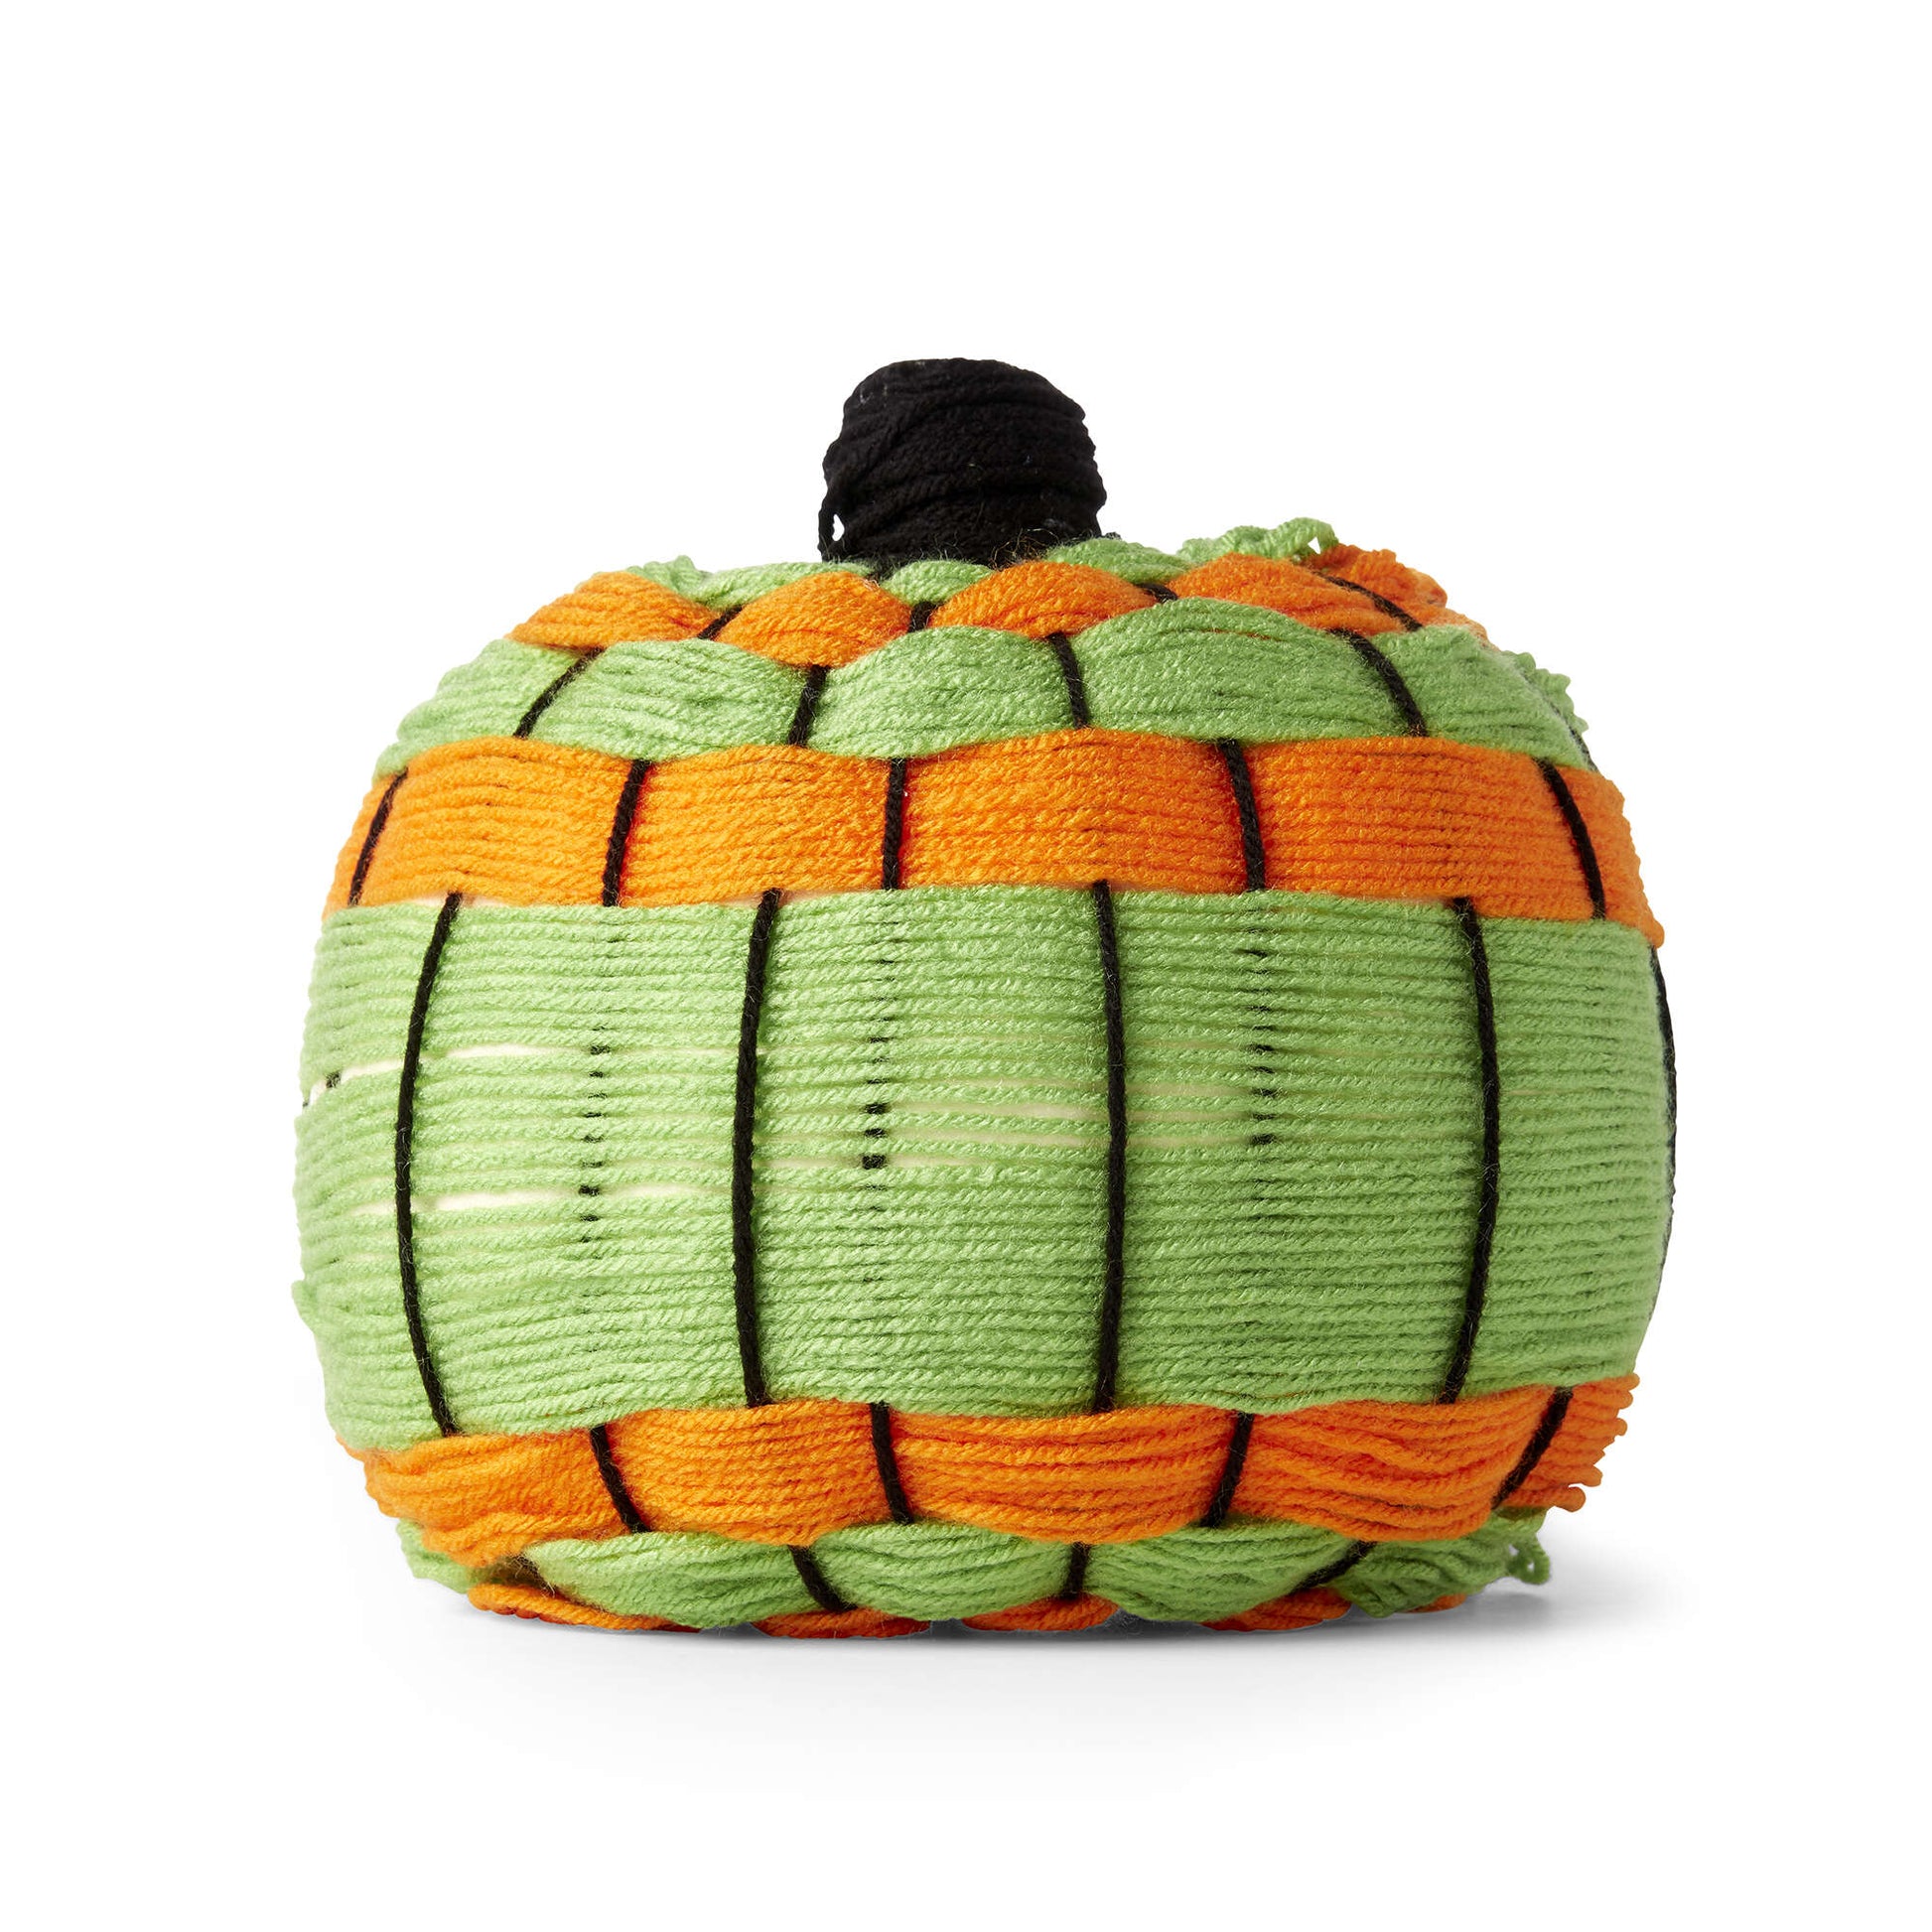 Free Red Heart Craft Hand Woven Yarn Wrapped Pumpkin Pattern